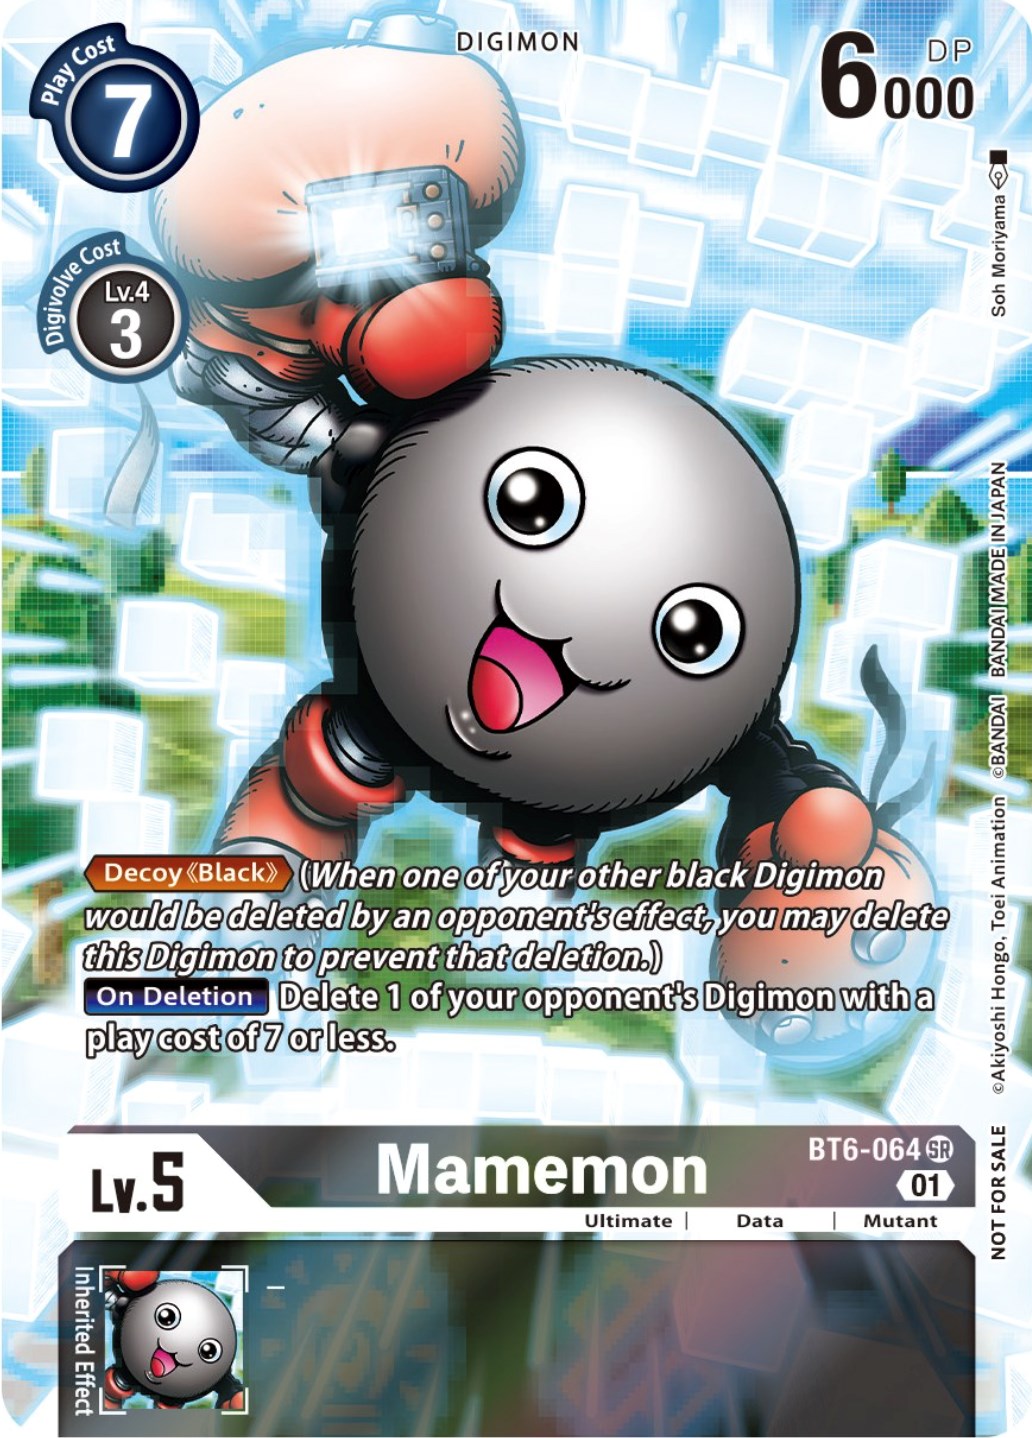 Mamemon [BT6-064] (25th Special Memorial Pack) [Double Diamond Promos]